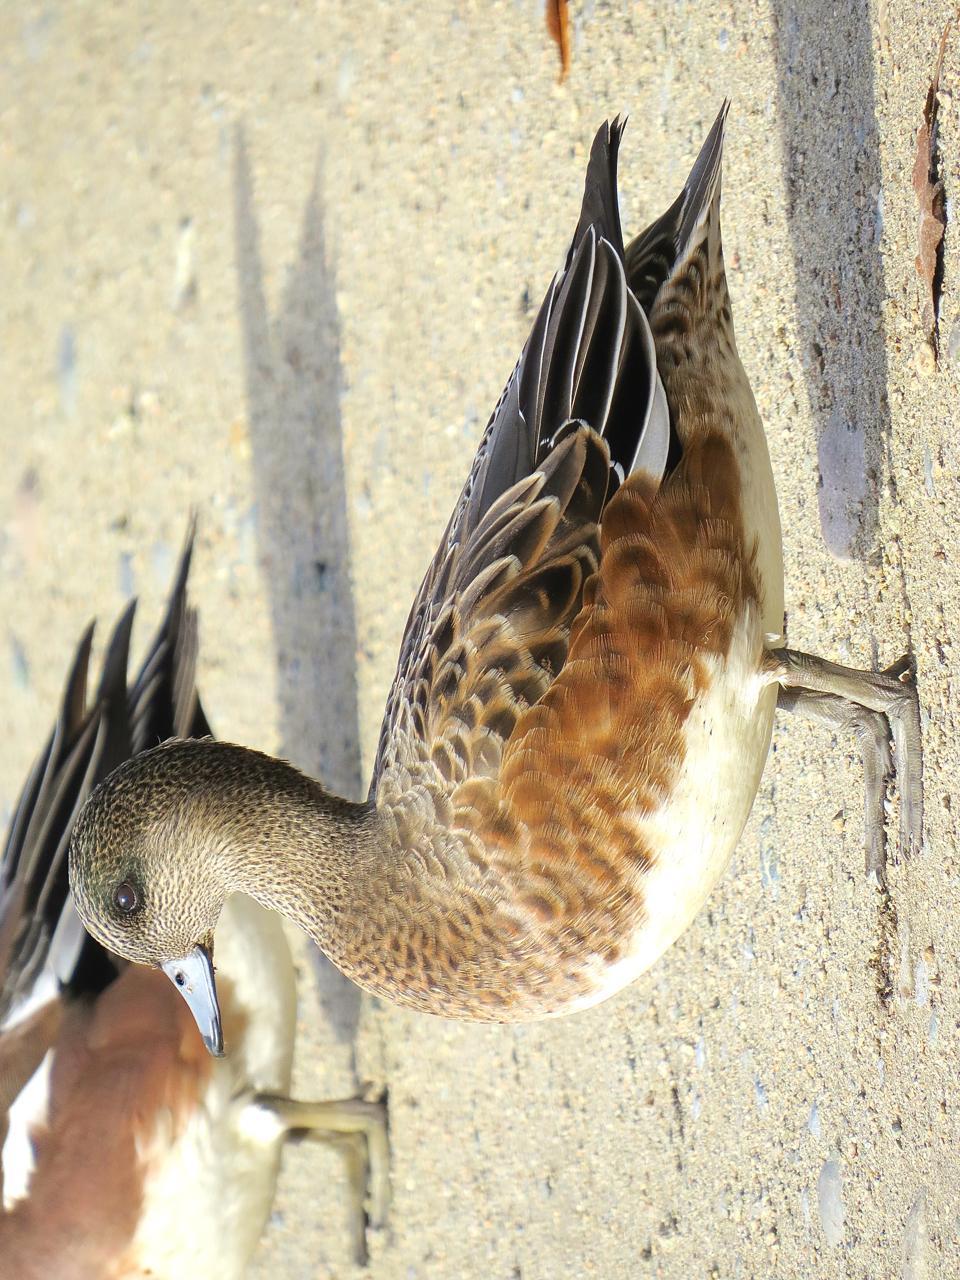 American Wigeon Photo by Brian Avent